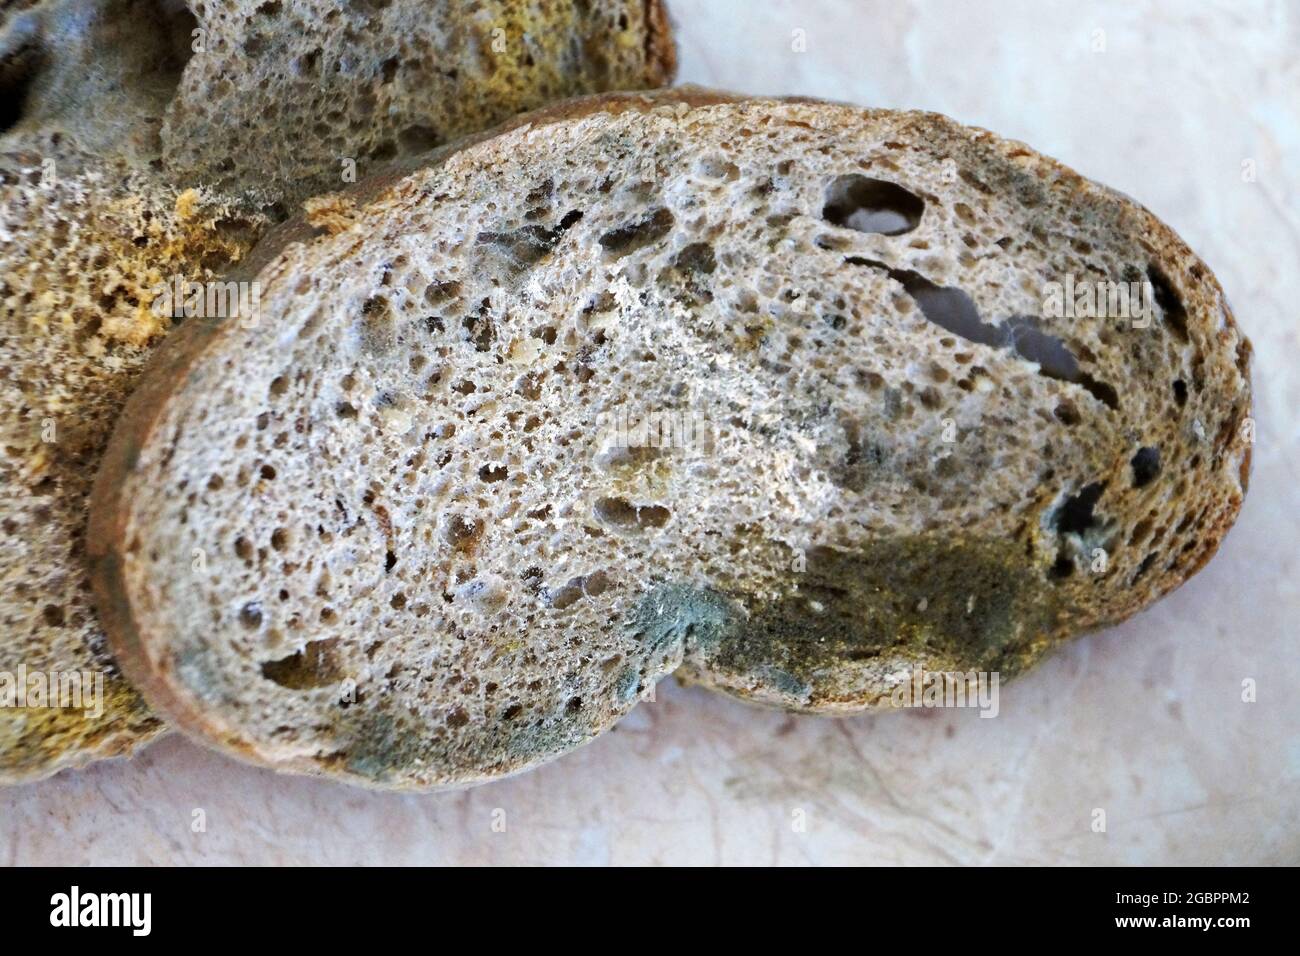 Black bread mold (Rhizopus stolonifer or Rhizopus nigricans) colonizing  bread, Stock Photo, Picture And Rights Managed Image. Pic. VD7-3338681